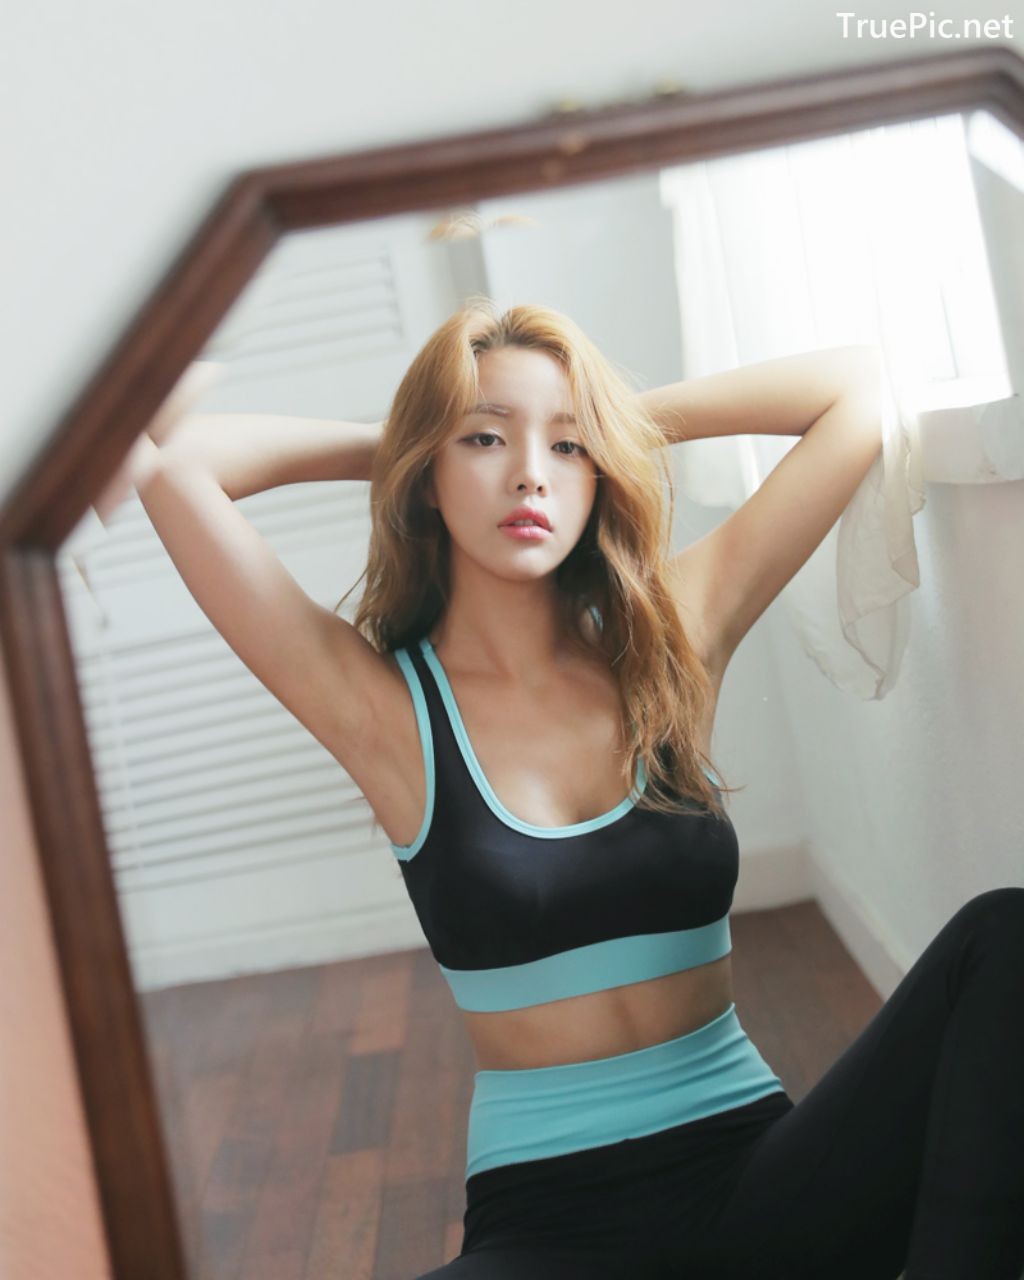 Image-Korean-Fashion-Model-Jin-Hee-Fitness-Set-Photoshoot-Collection-TruePic.net- Picture-74